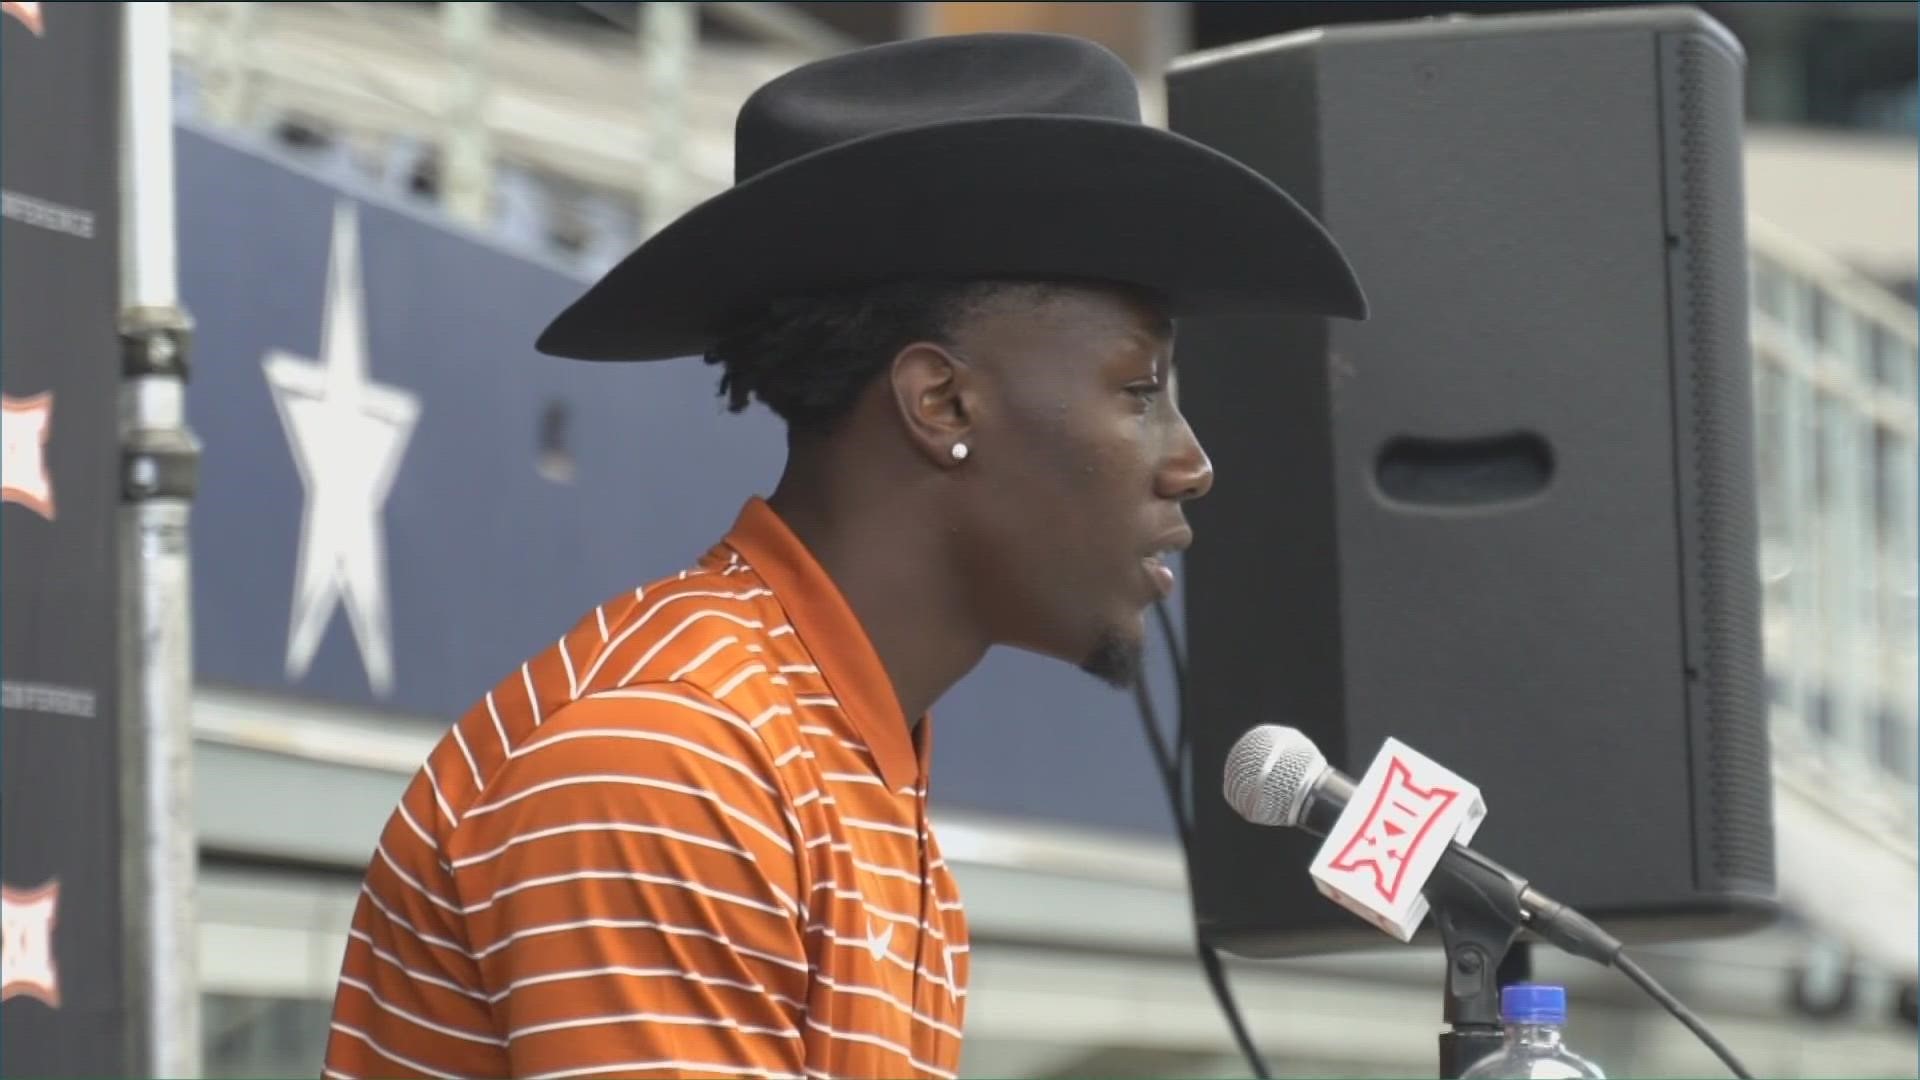 Linebacker Demarvion Overshown and Coach Brennan Marion are rocking similar looks with cowboy hats, but who wore it first?